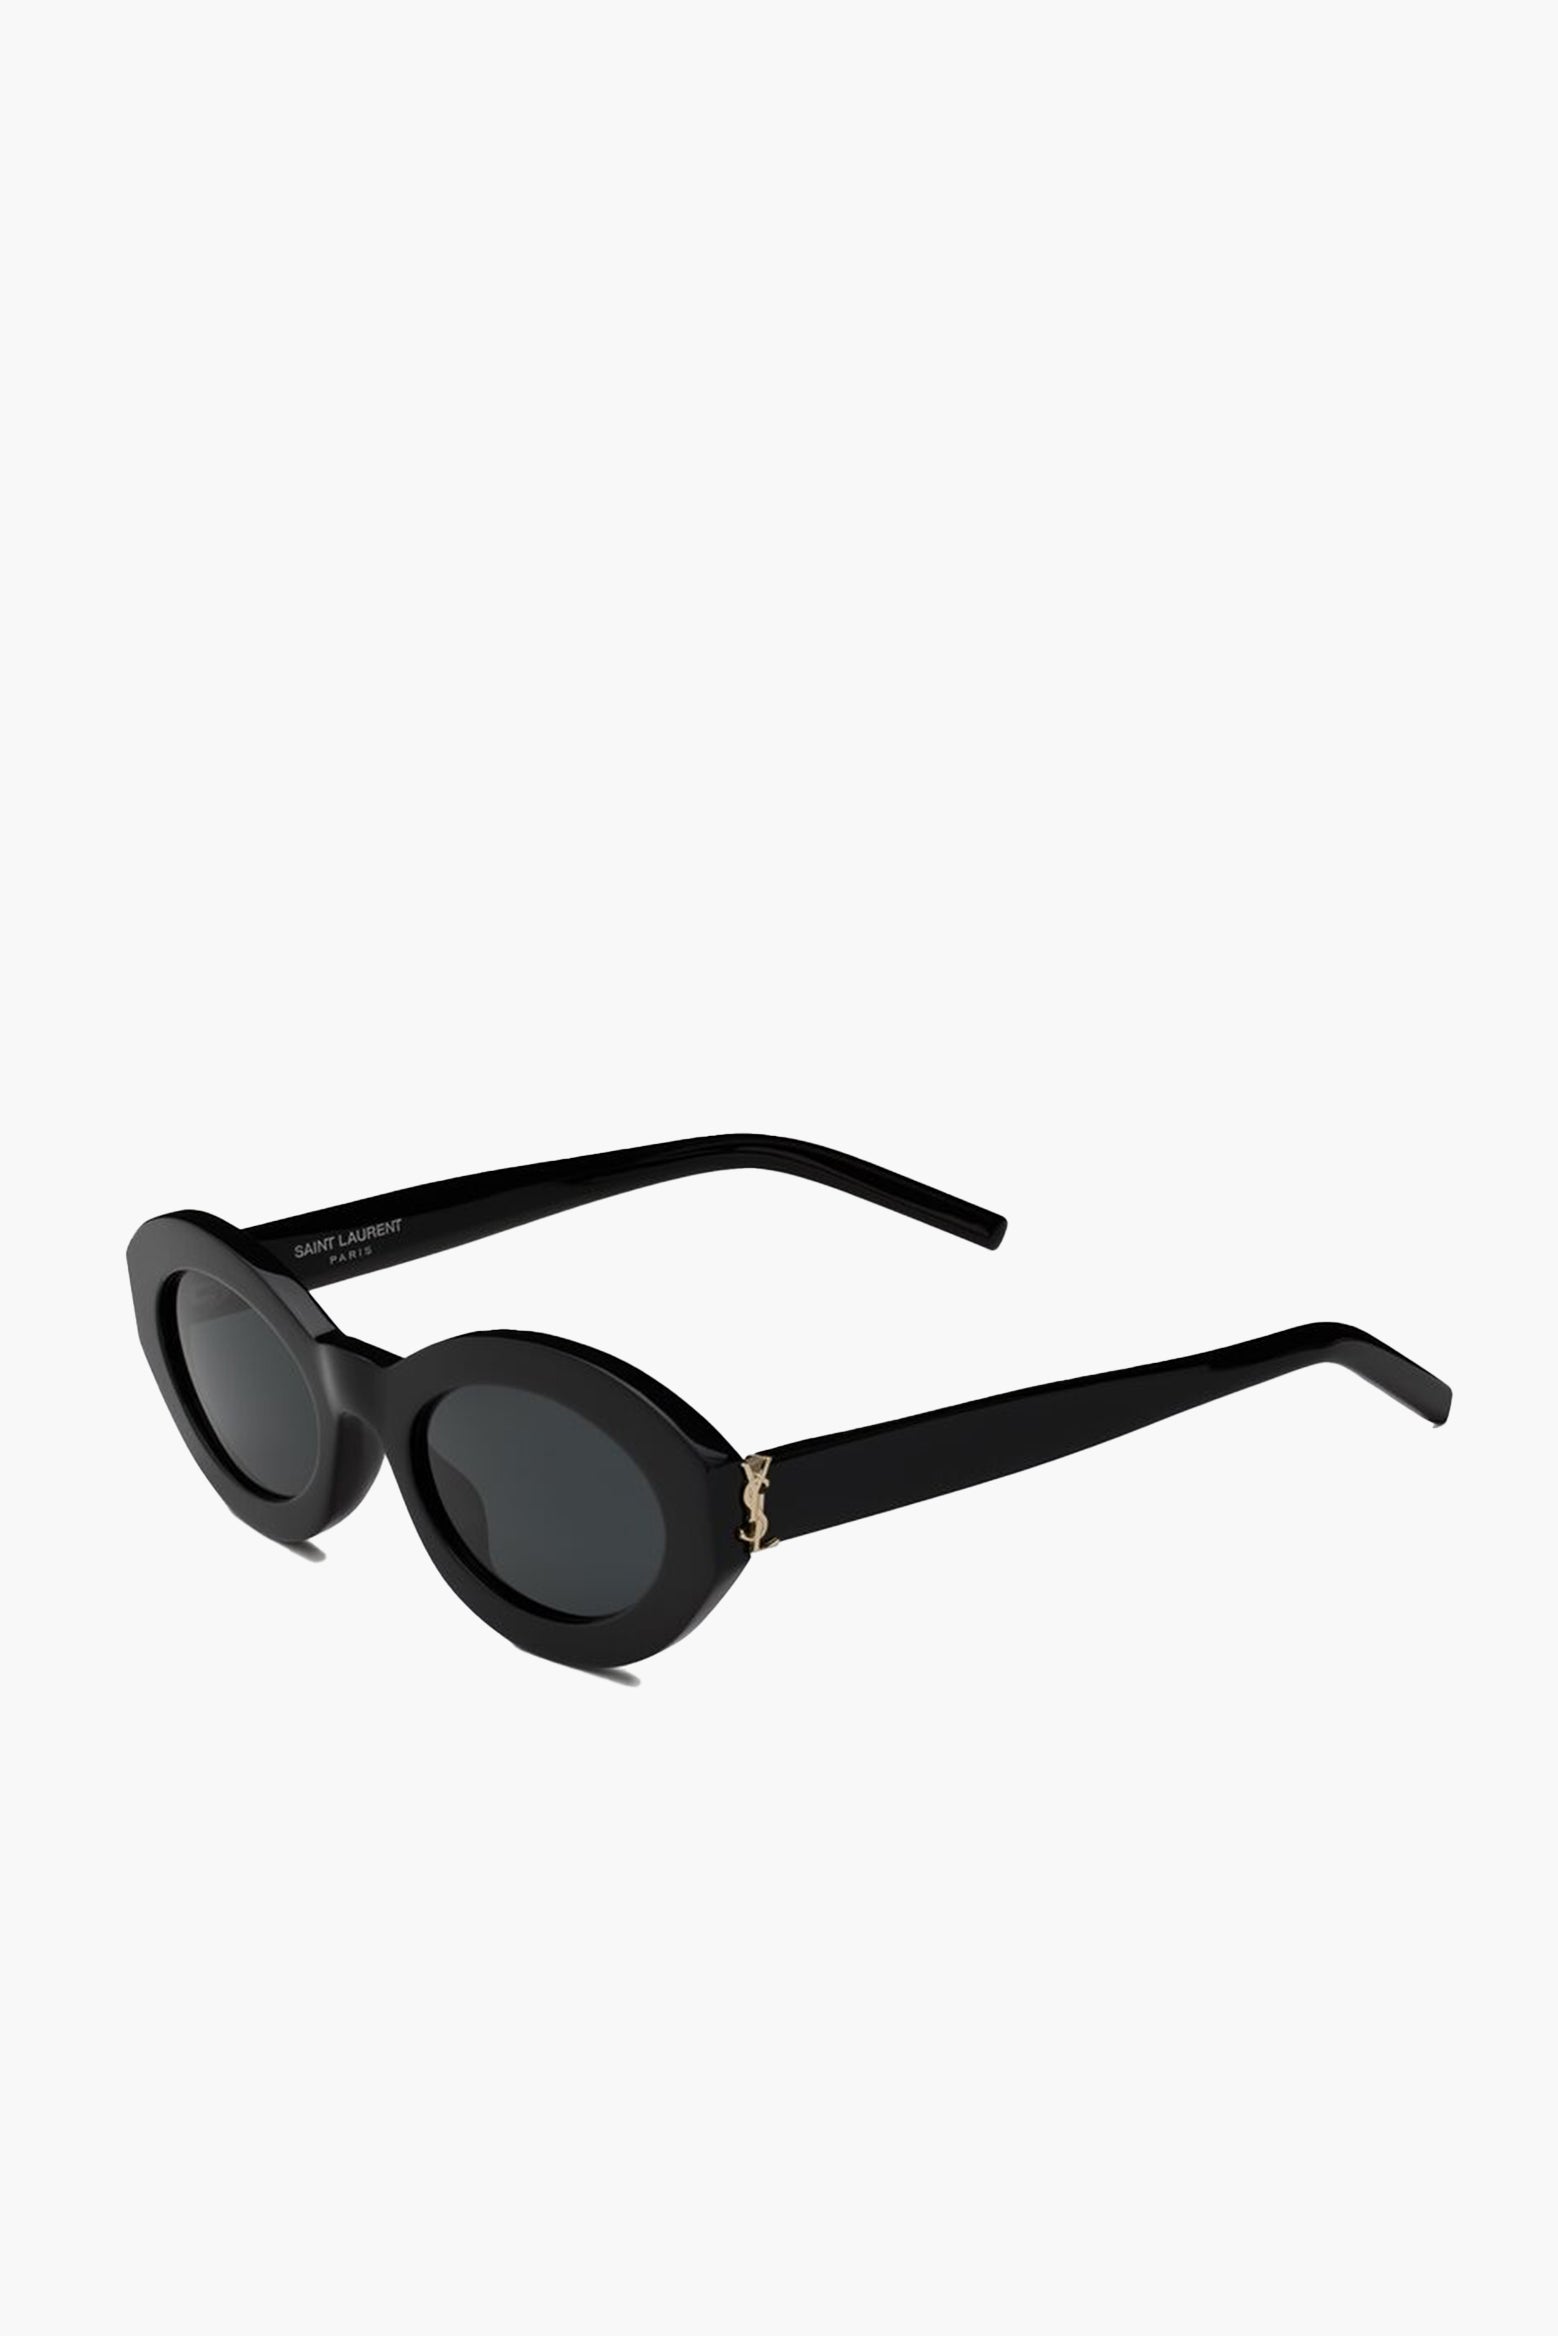 YSL Oval Acetate Frame Sunglasses in Black and Light Gold | The New Trend